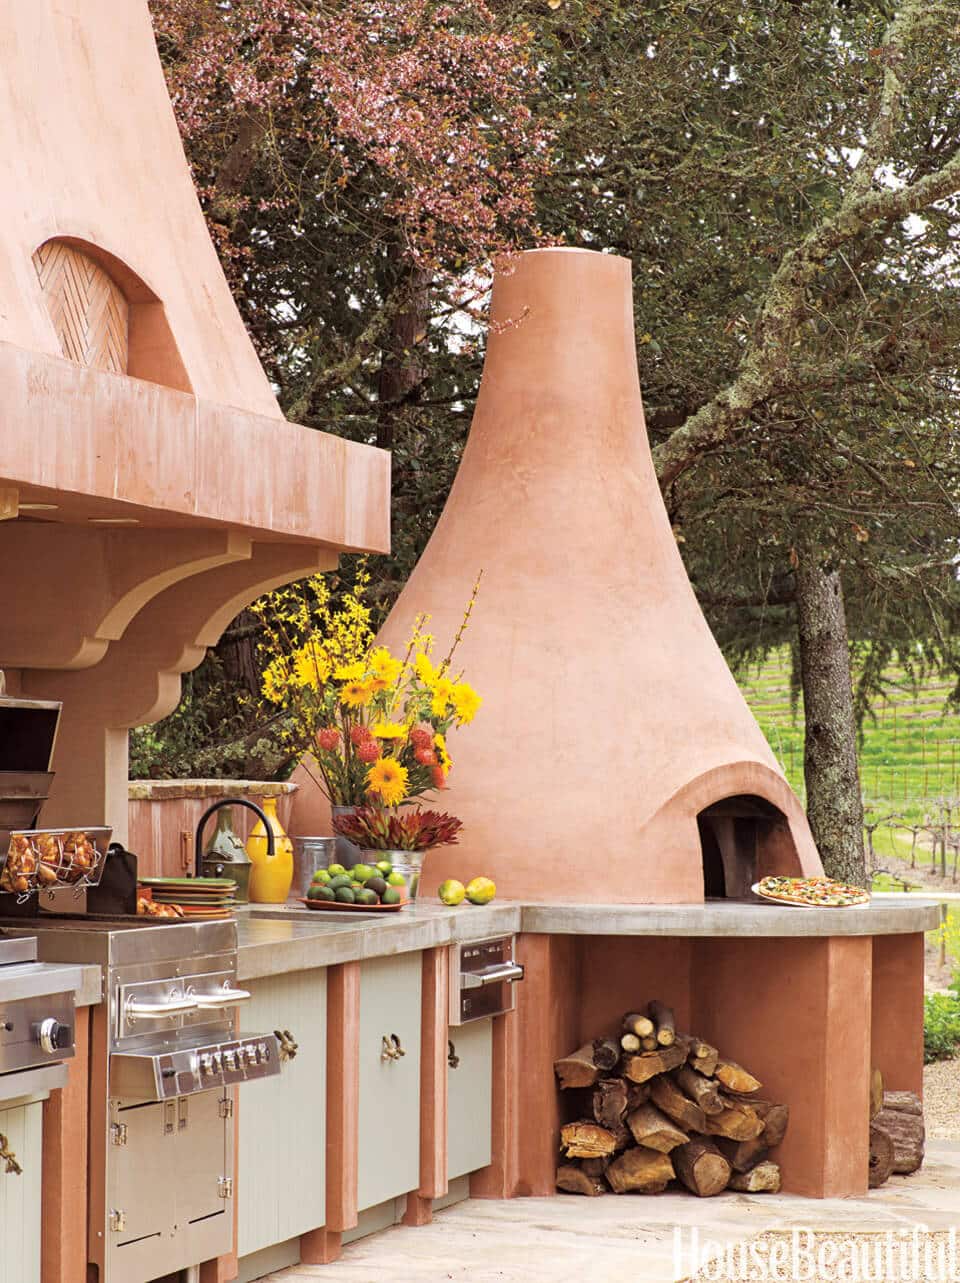 Terra Cotta Outdoor Kitchen With Pizza Oven